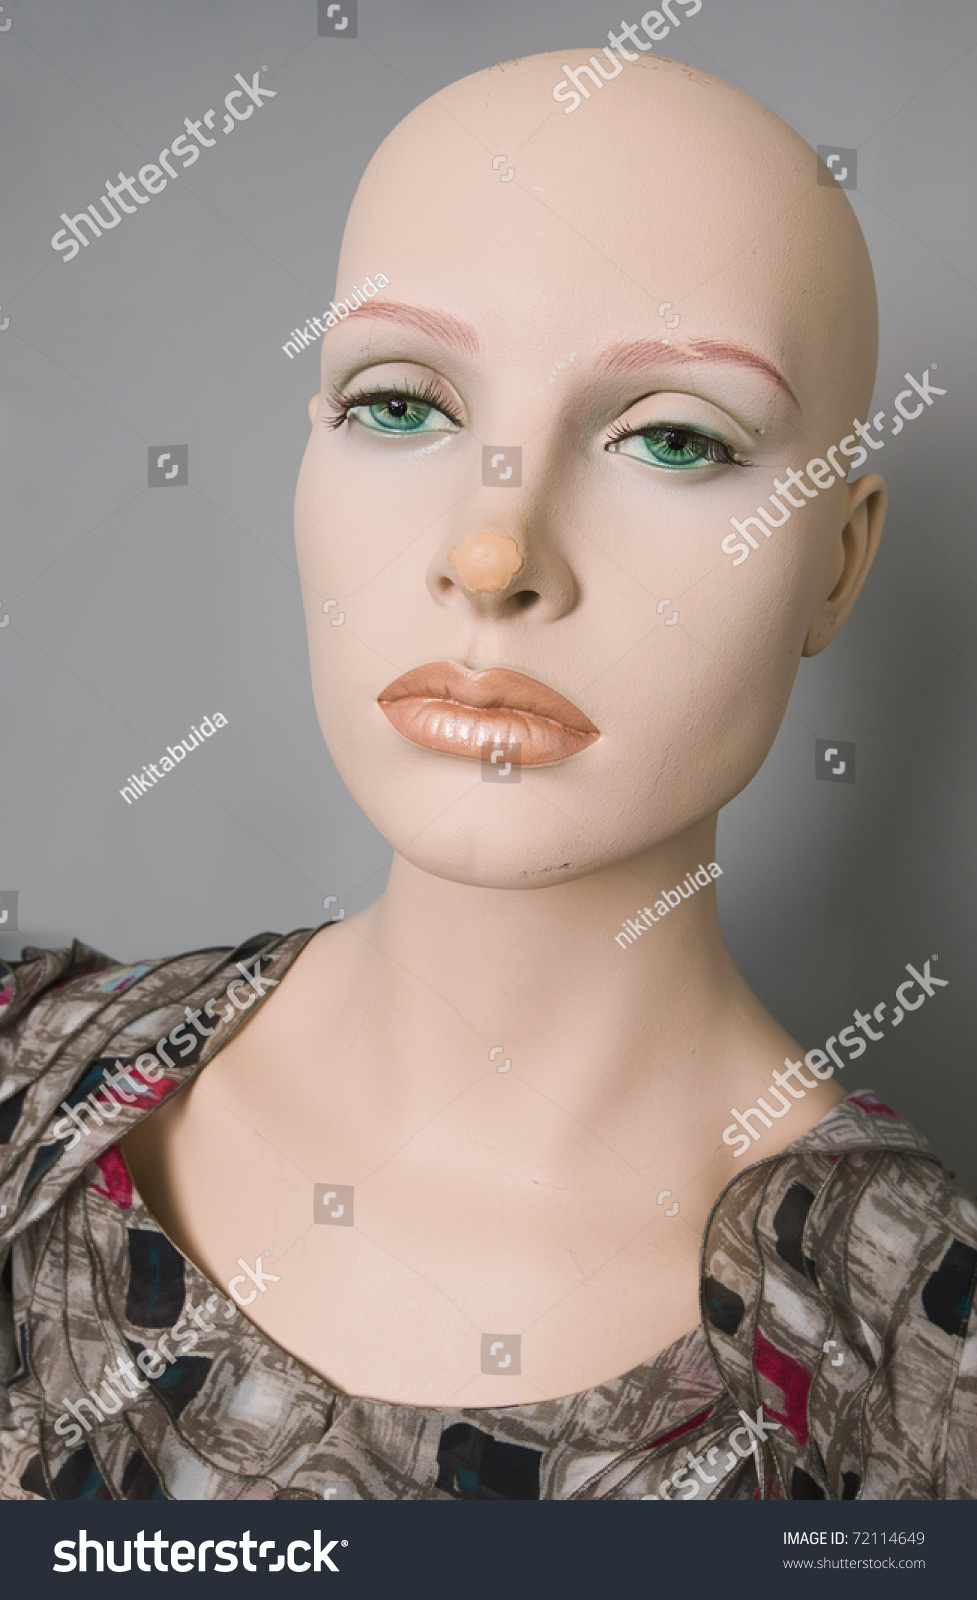 Mannequin (Clothes Dummy) Head With Bright Makeup And Signs Of Heavy ...